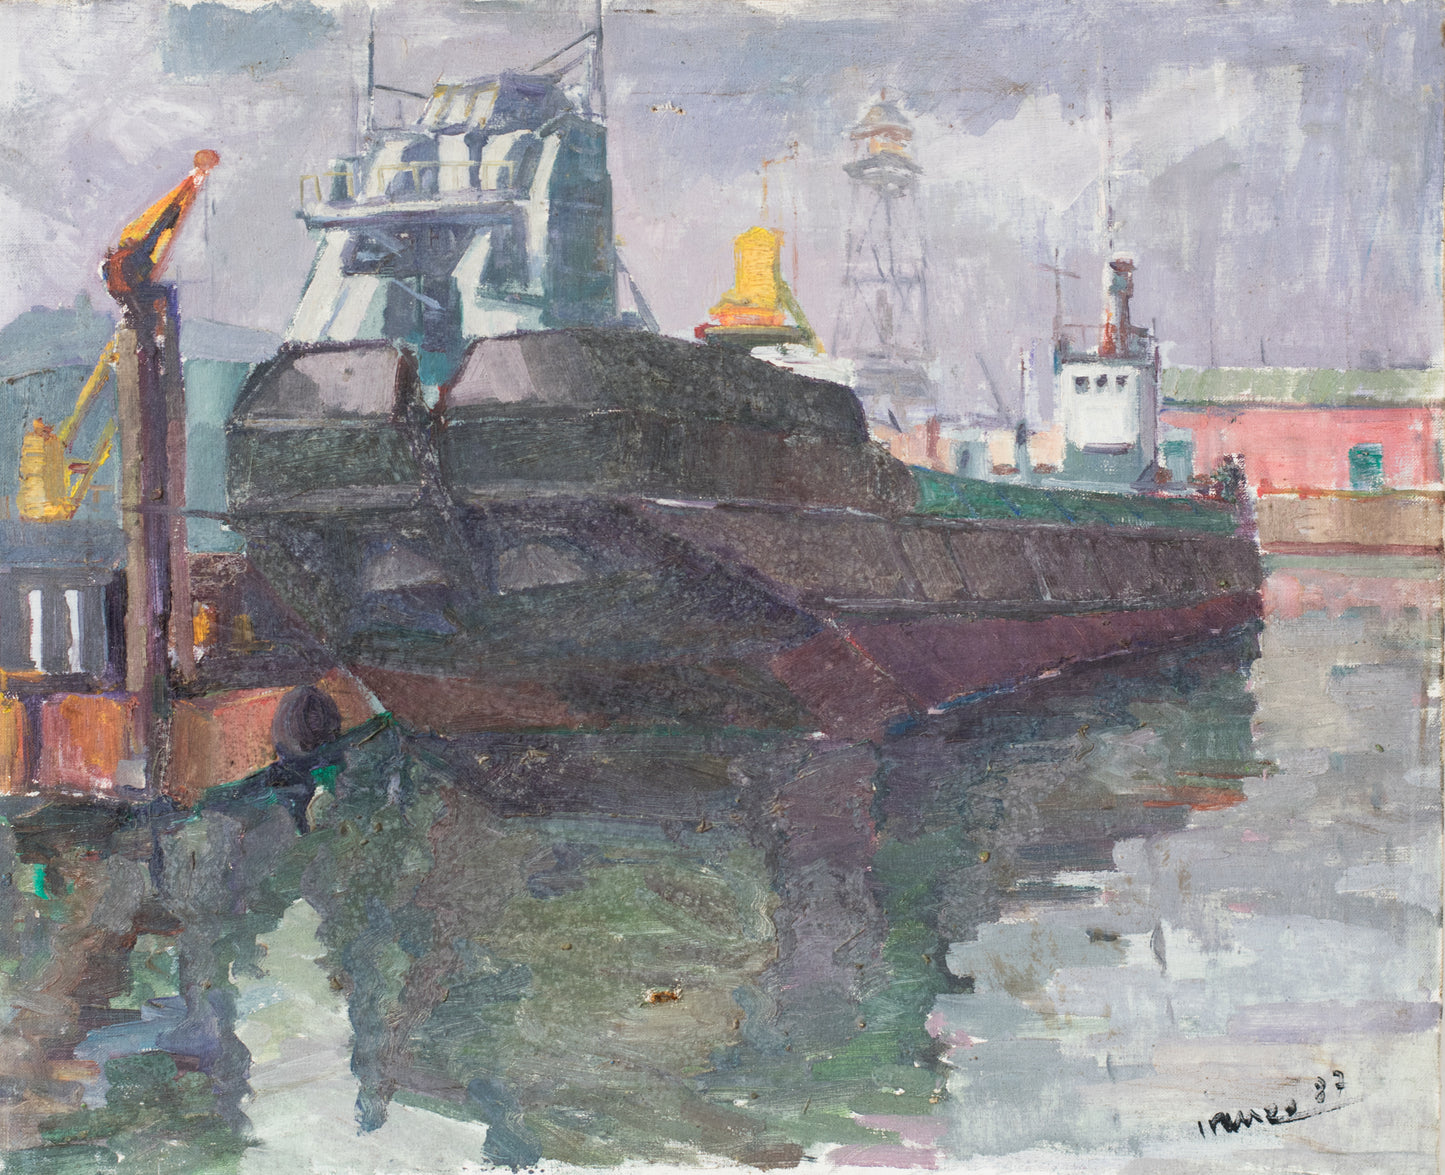 Harbour Scene with Large Tanker